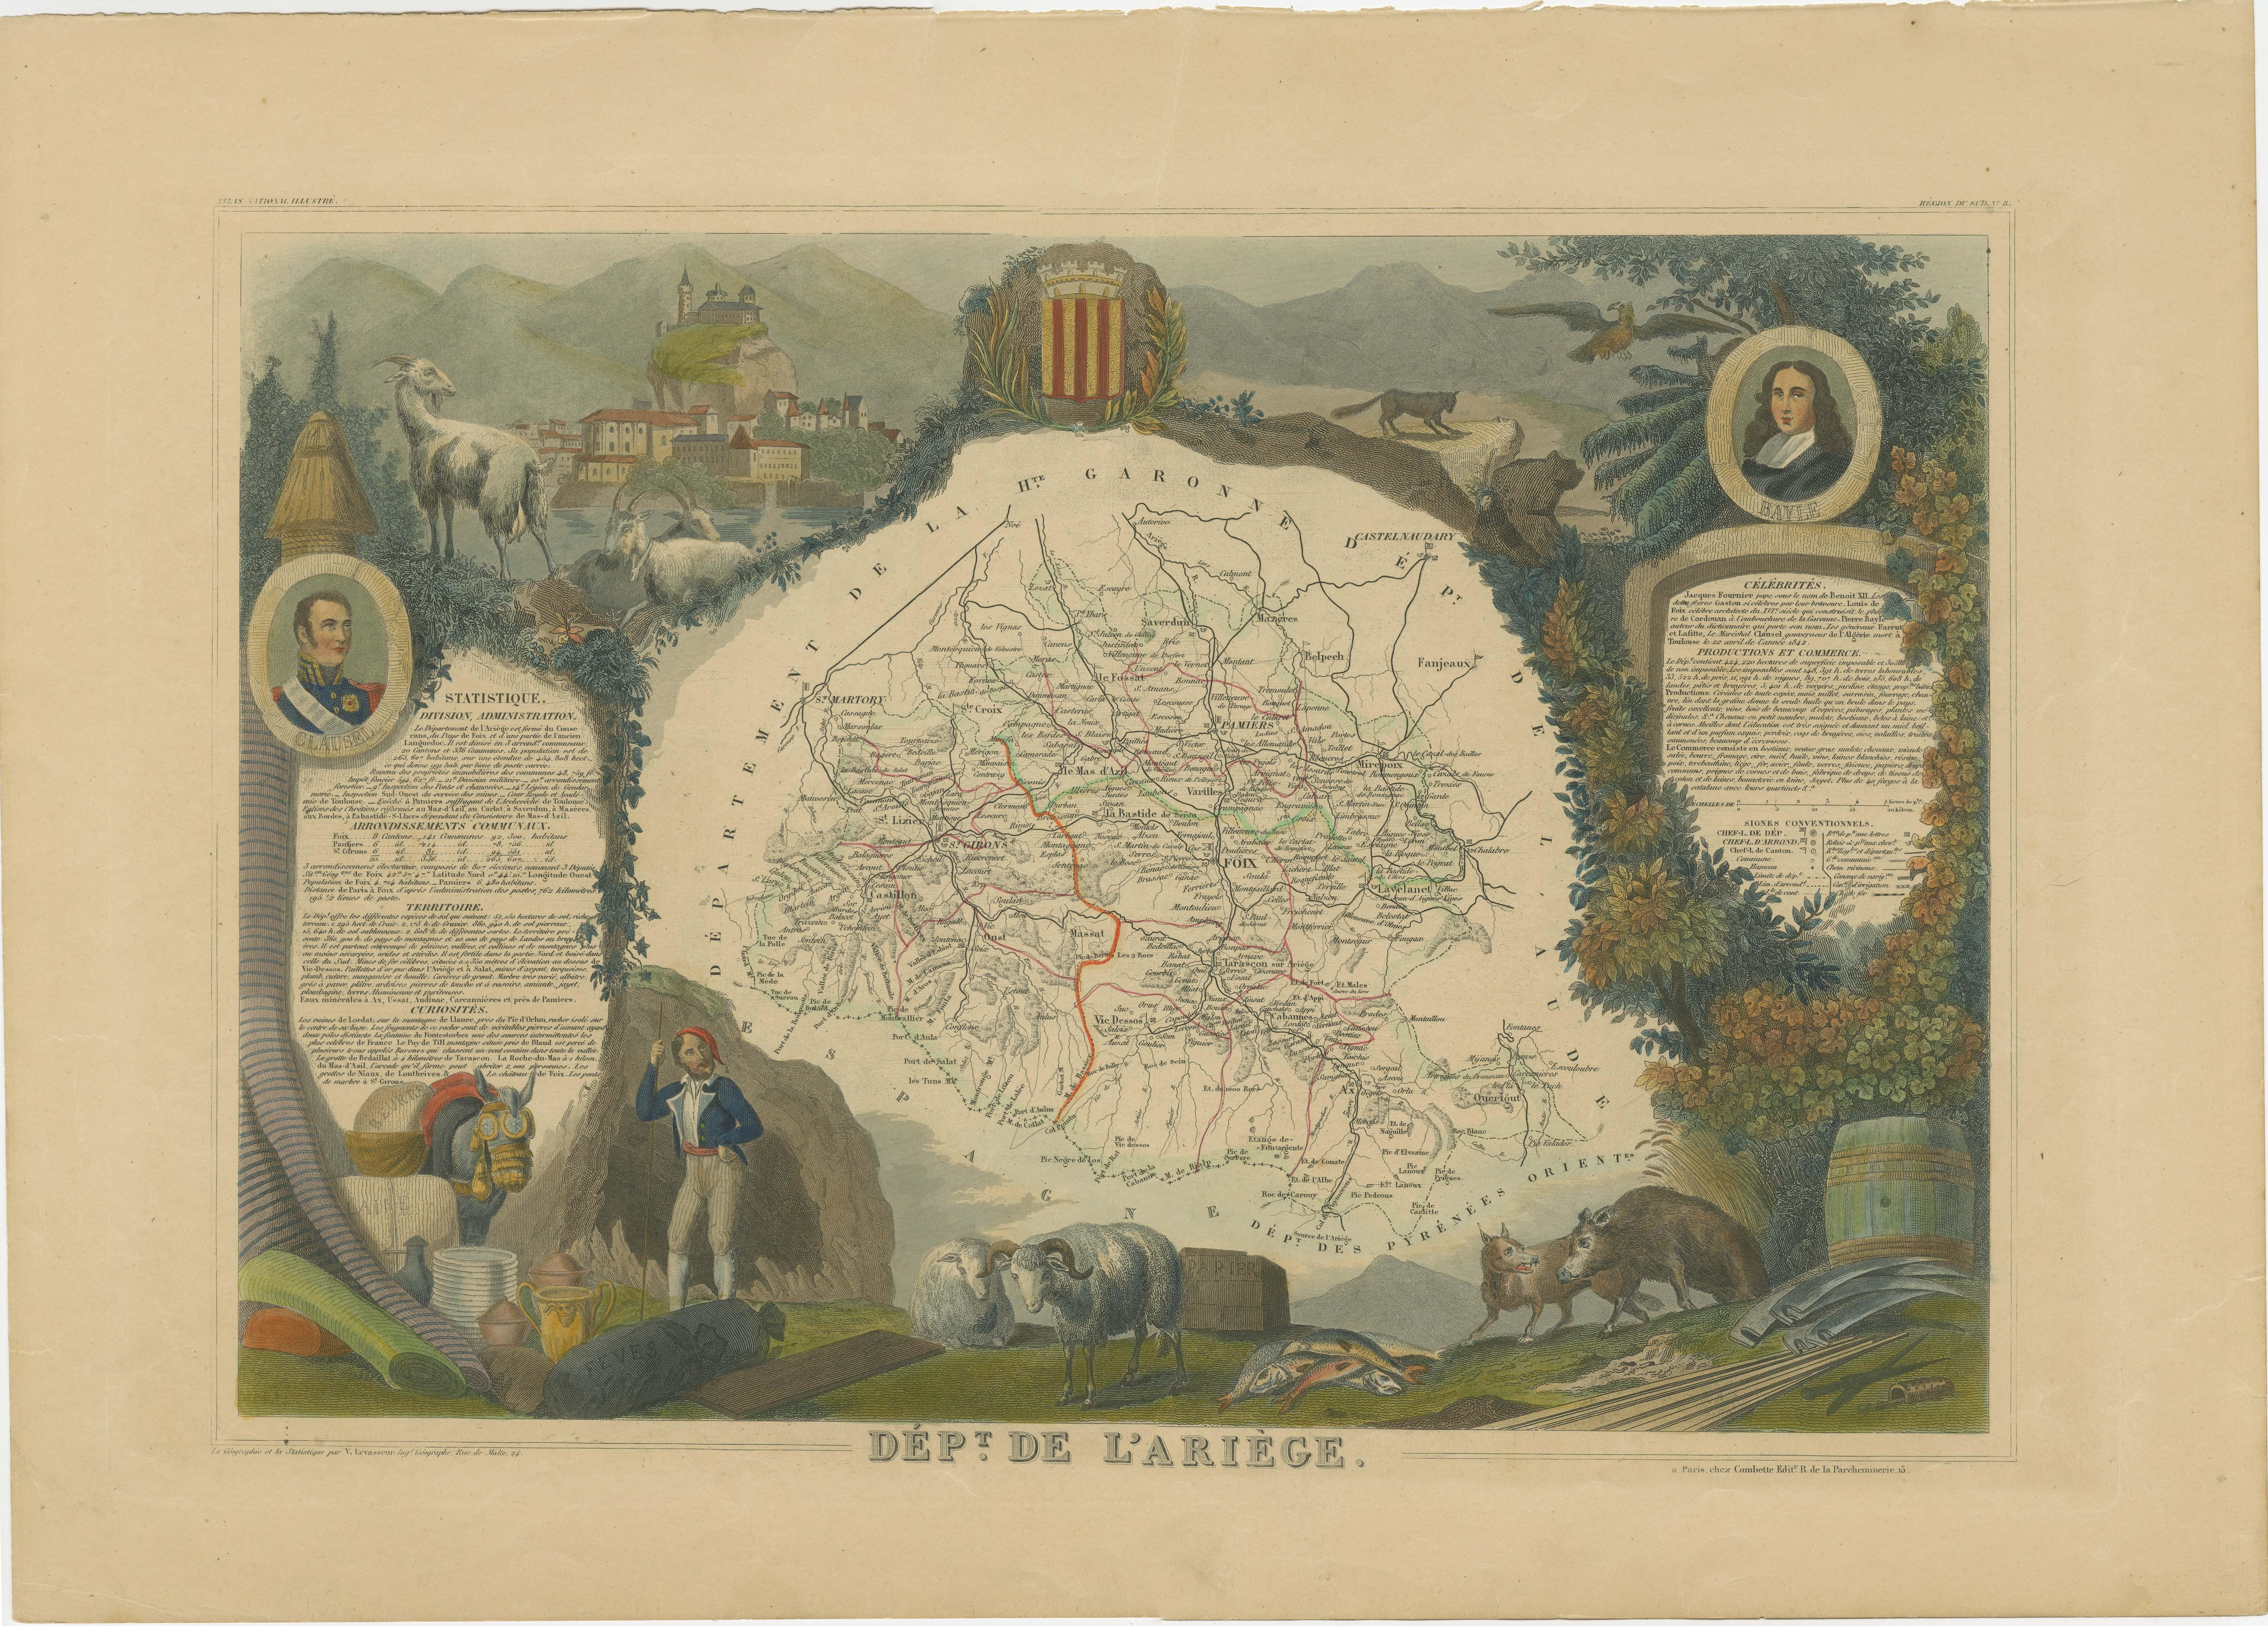 Antique map titled 'Dépt. de l'Ariège'. Map of the French department of Ariege, France. This area of France is known for its production of semi-soft and mild cheeses, such as Bethmale, Bamalous, Moulis and Rogallai. The whole is surrounded by